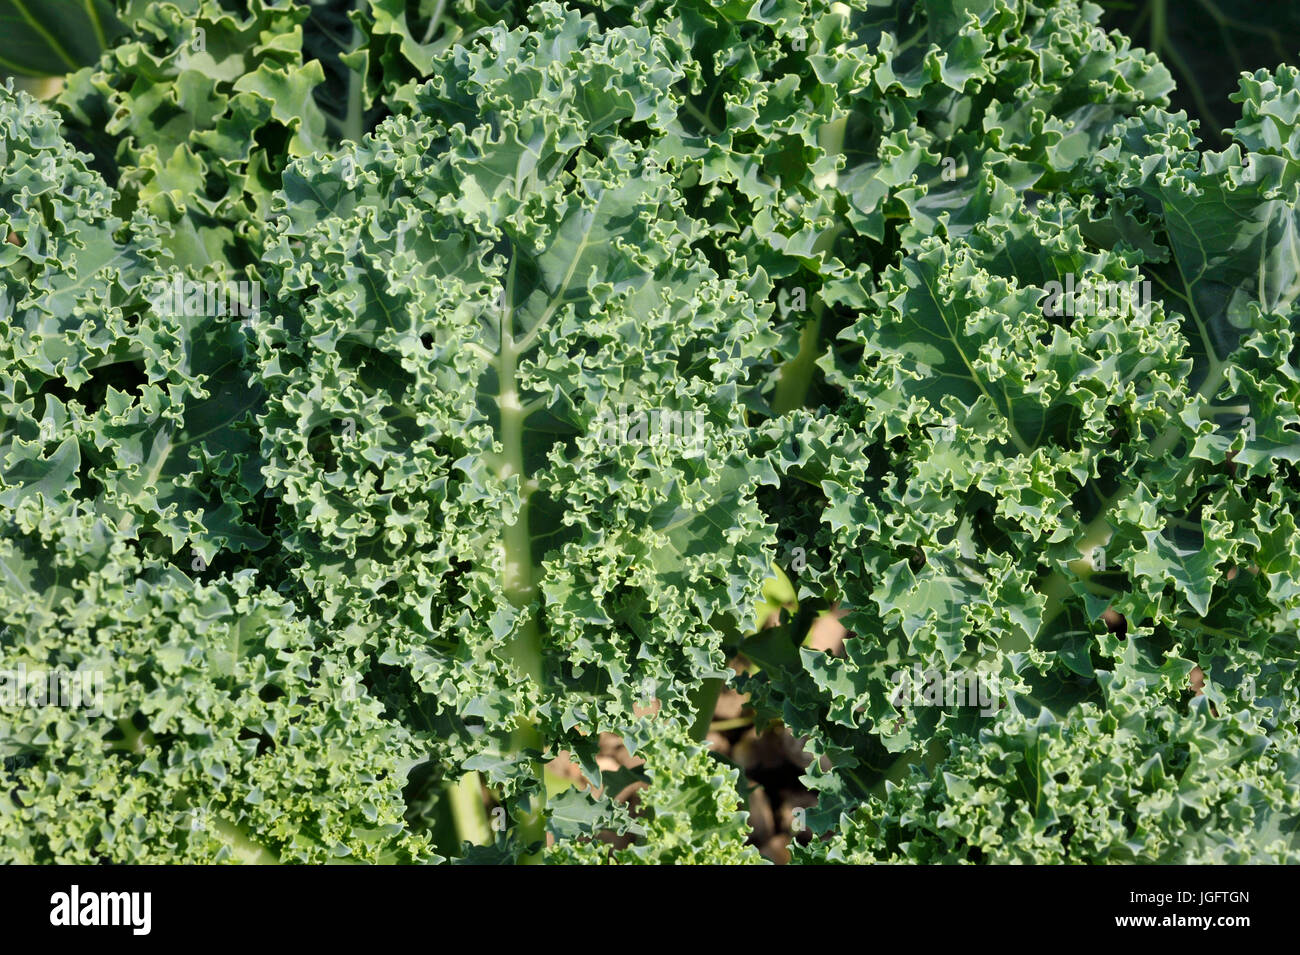 Curly Kale a crinkly cabbage, loose leaves form a rosette as the plants grow and and is often called a superfood. Stock Photo